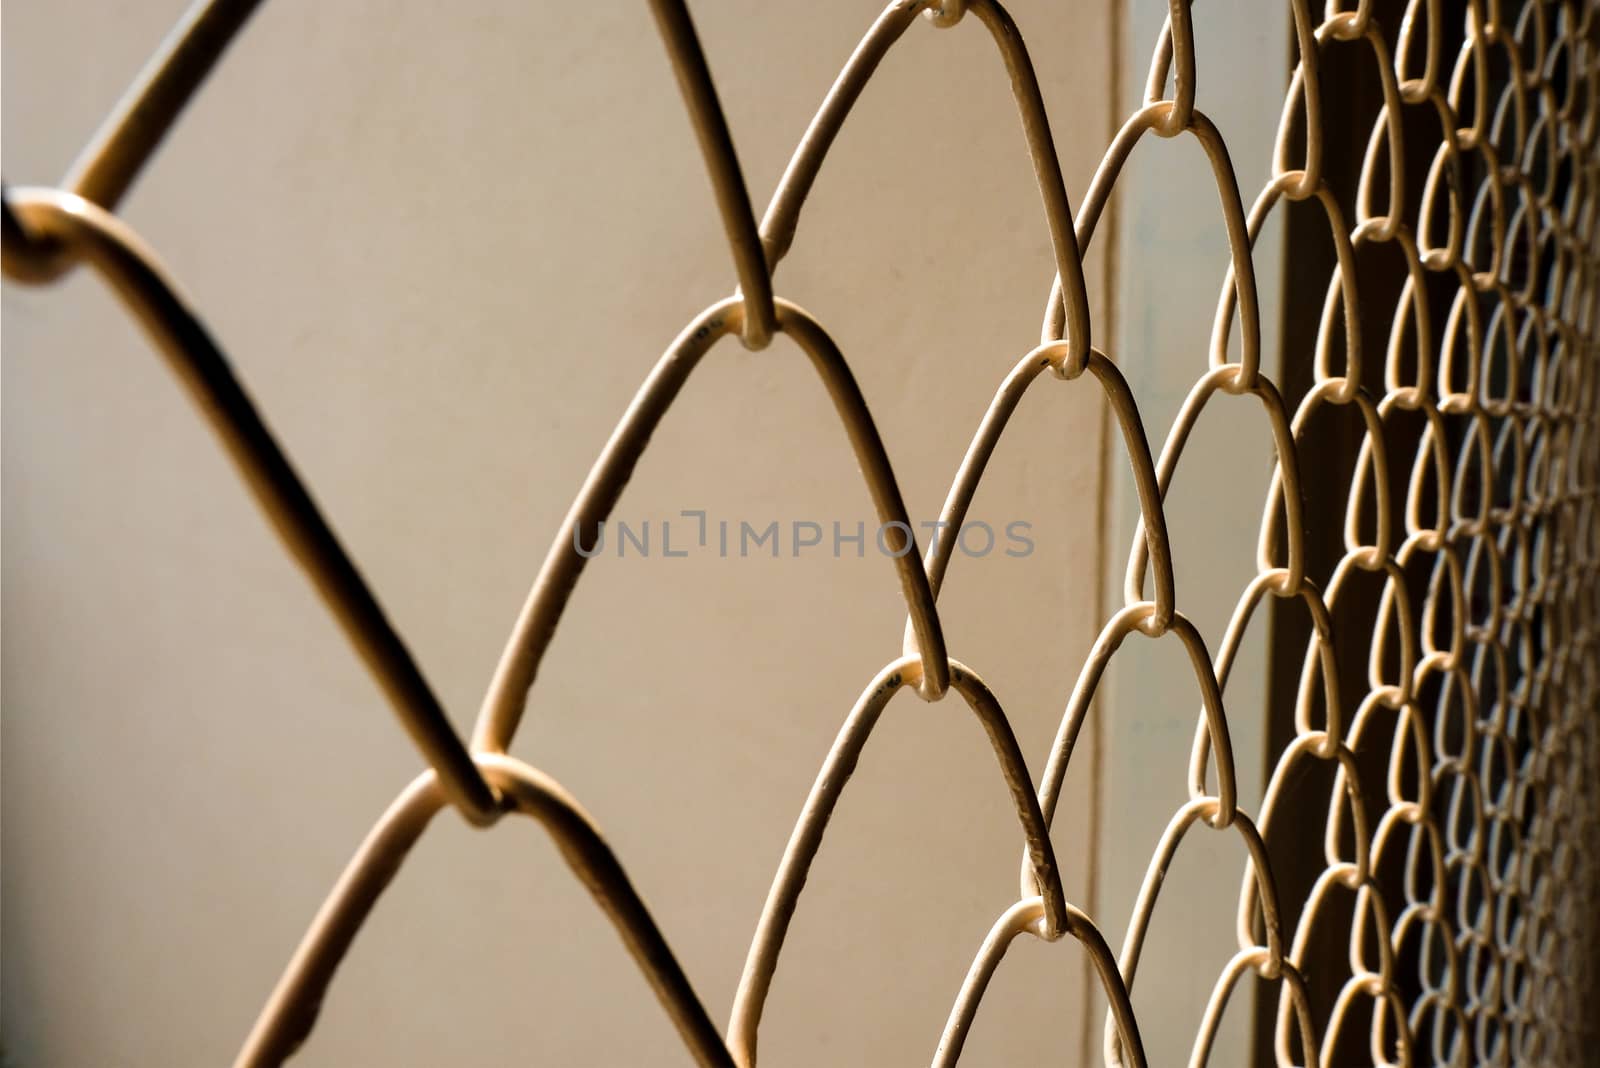 fence wiring, metal wire barrier with repeated patterns and leading lines: security, freedom concepts